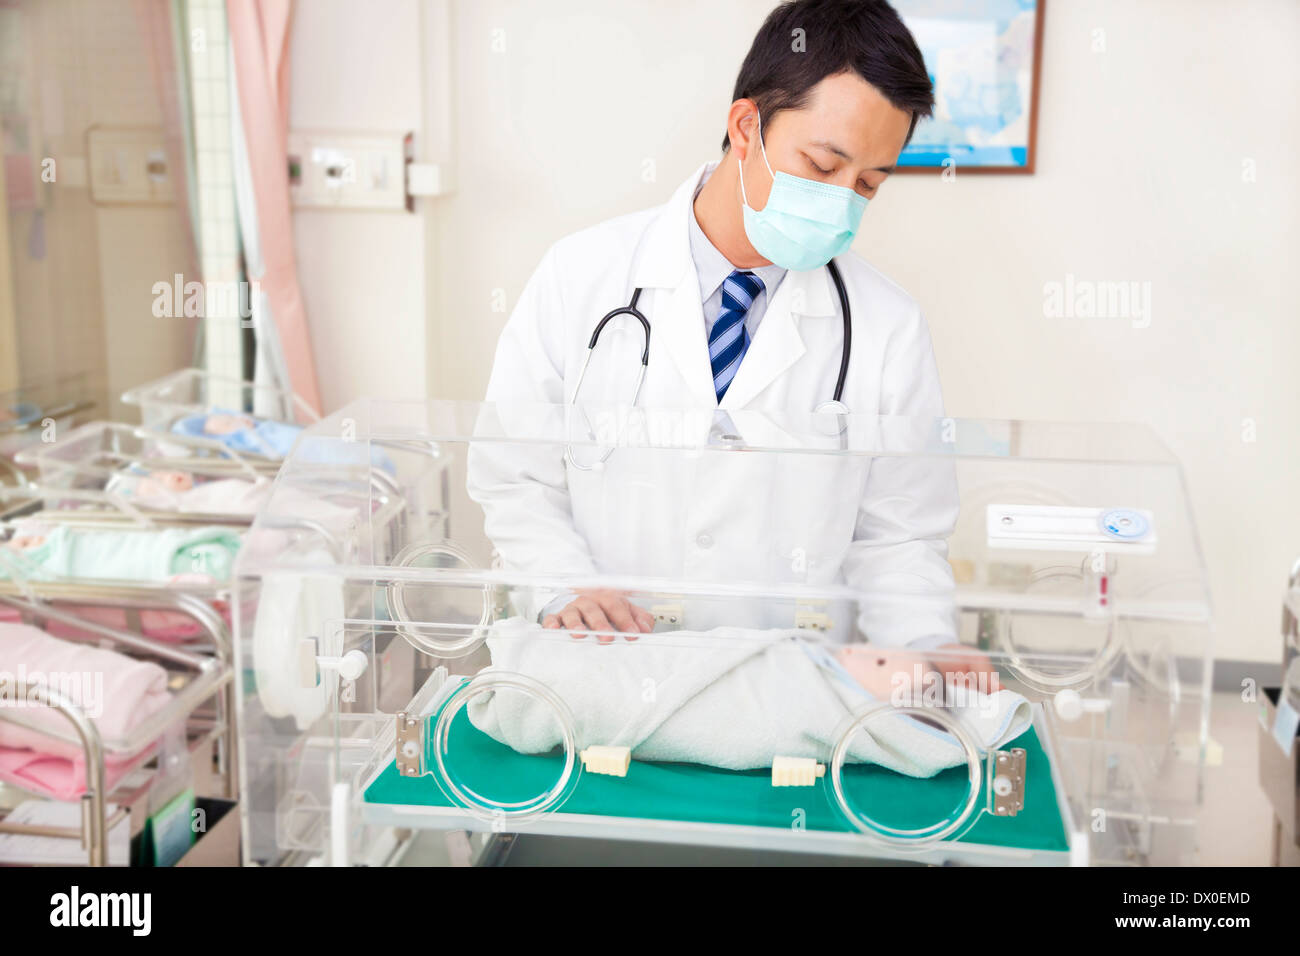 doctor examine a fake infant body situation Stock Photo